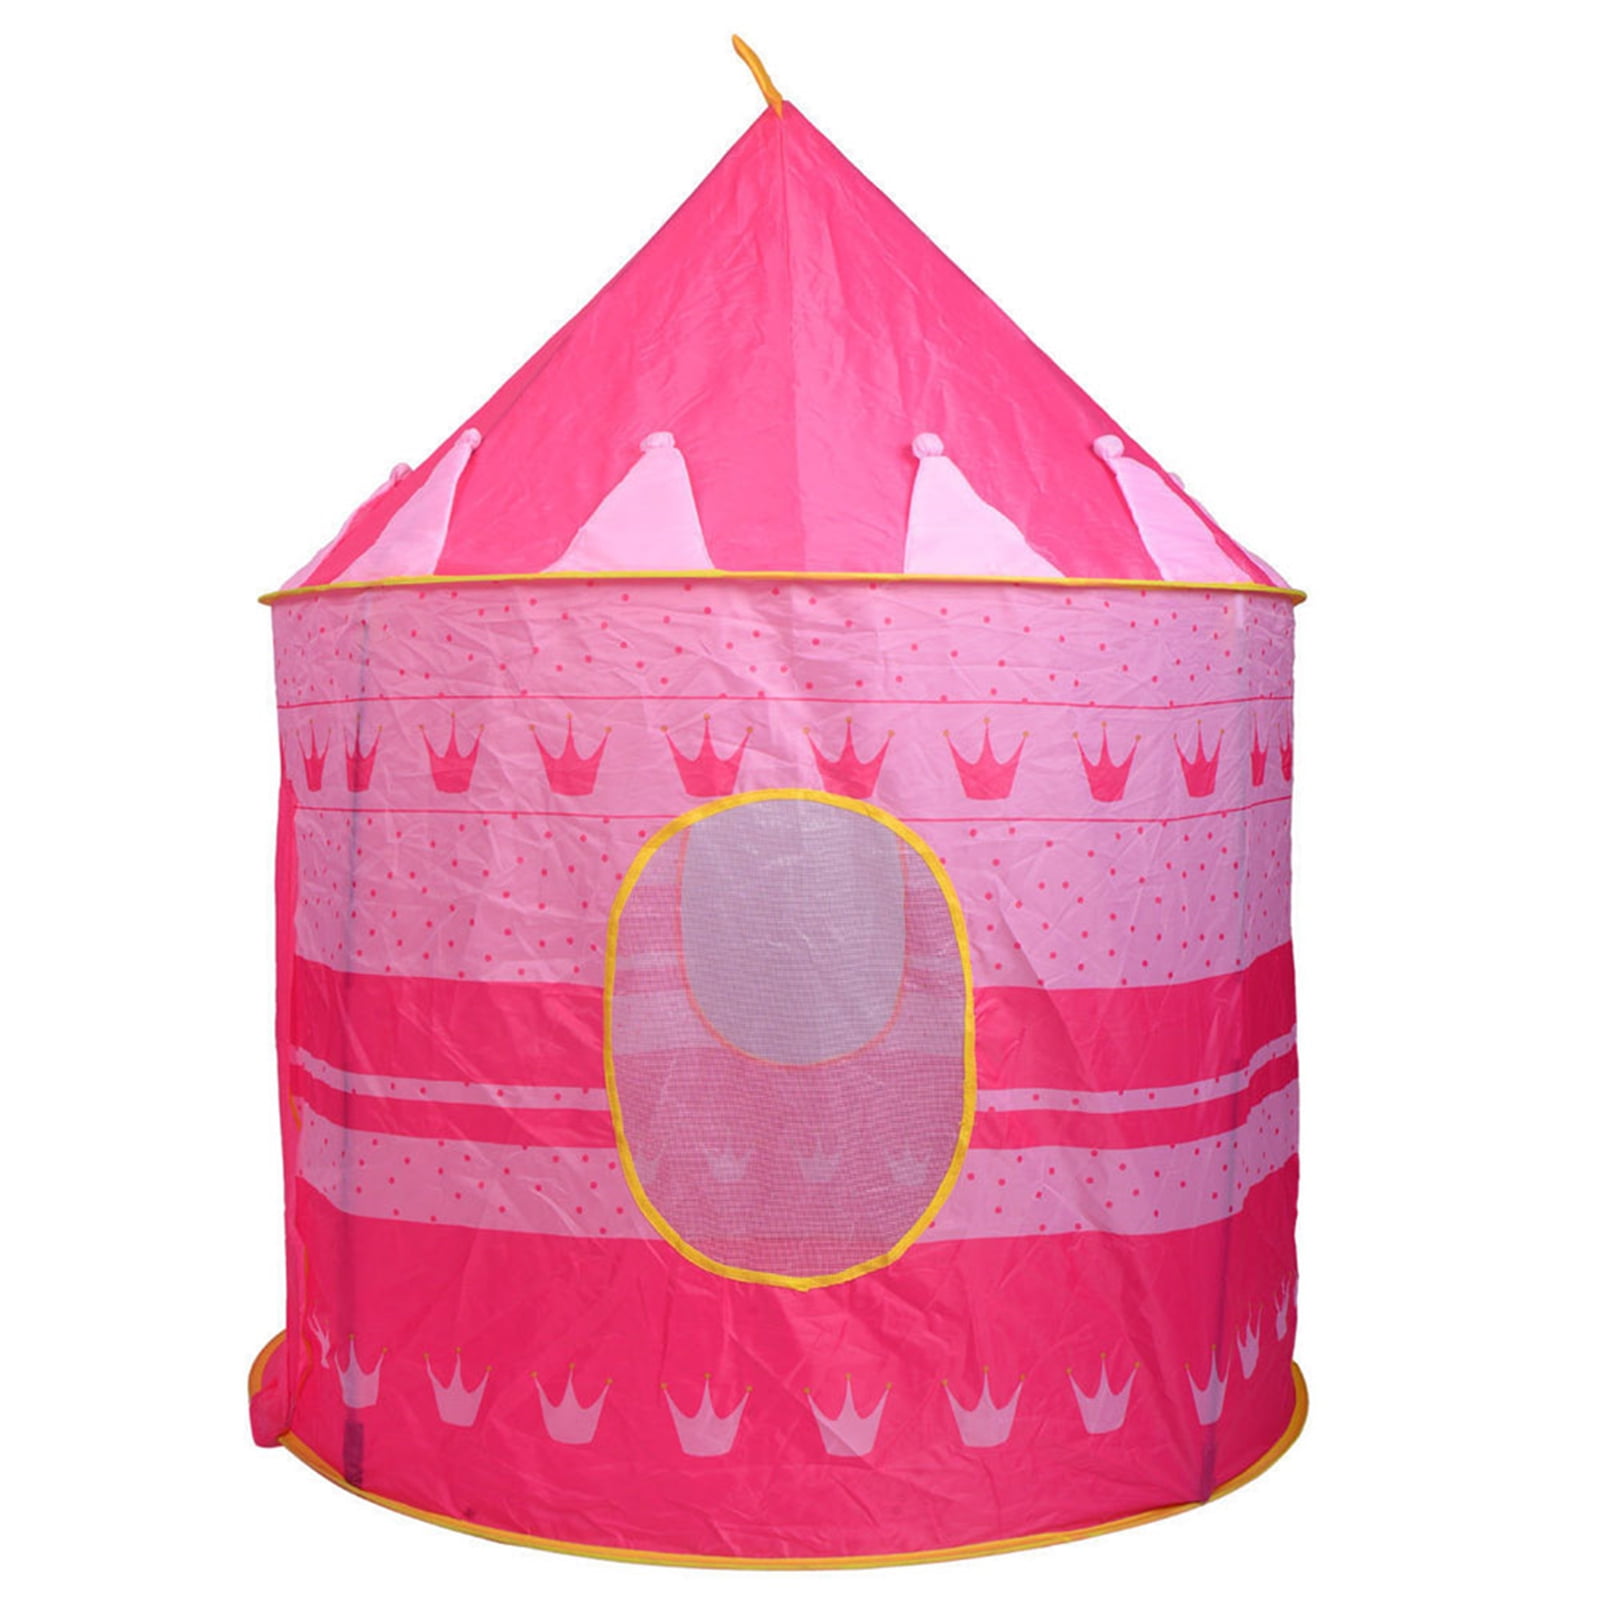 Details about   Foldable Folding Tent Children Cubby Playhouse Kids Gift Outdoor Toy Tent Castle 